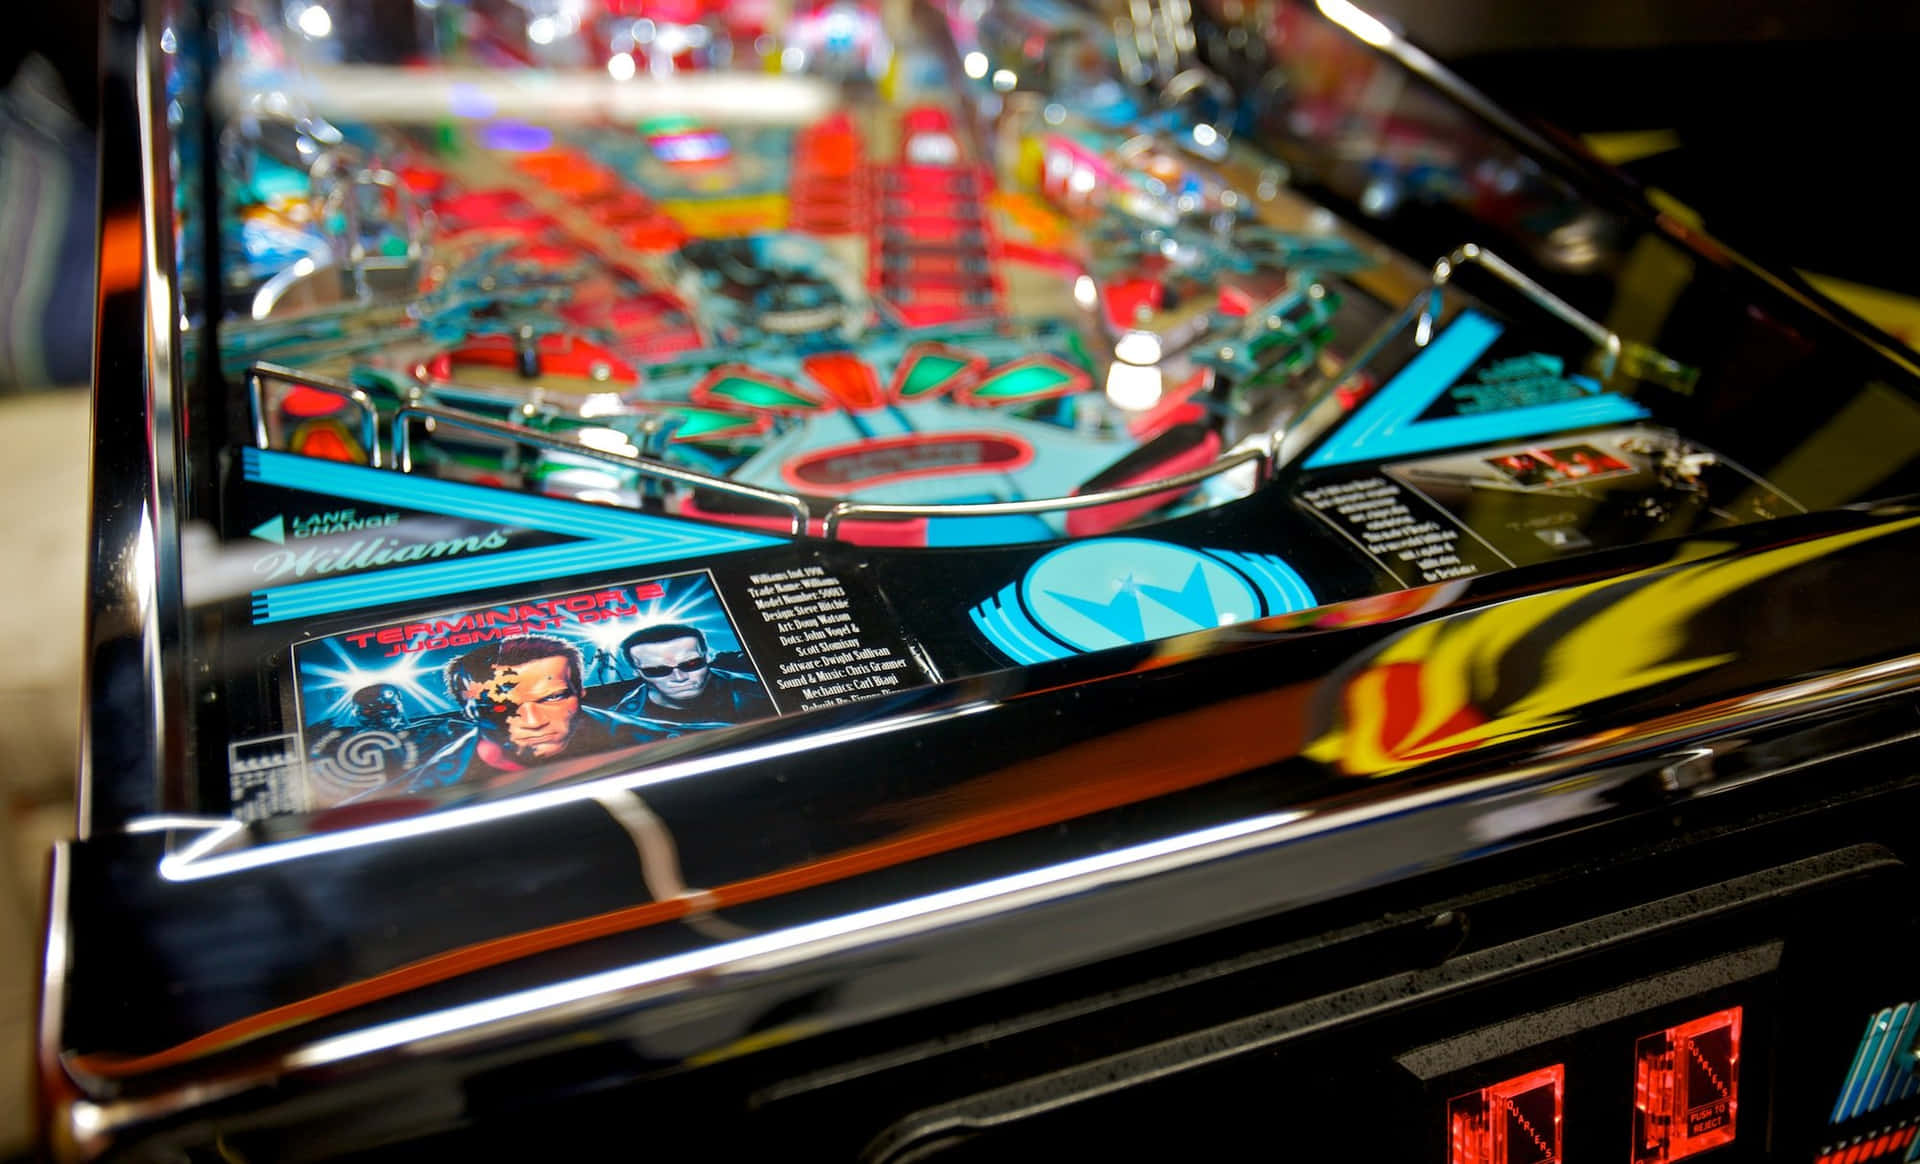 Captivating Pinball Machine In Action Wallpaper